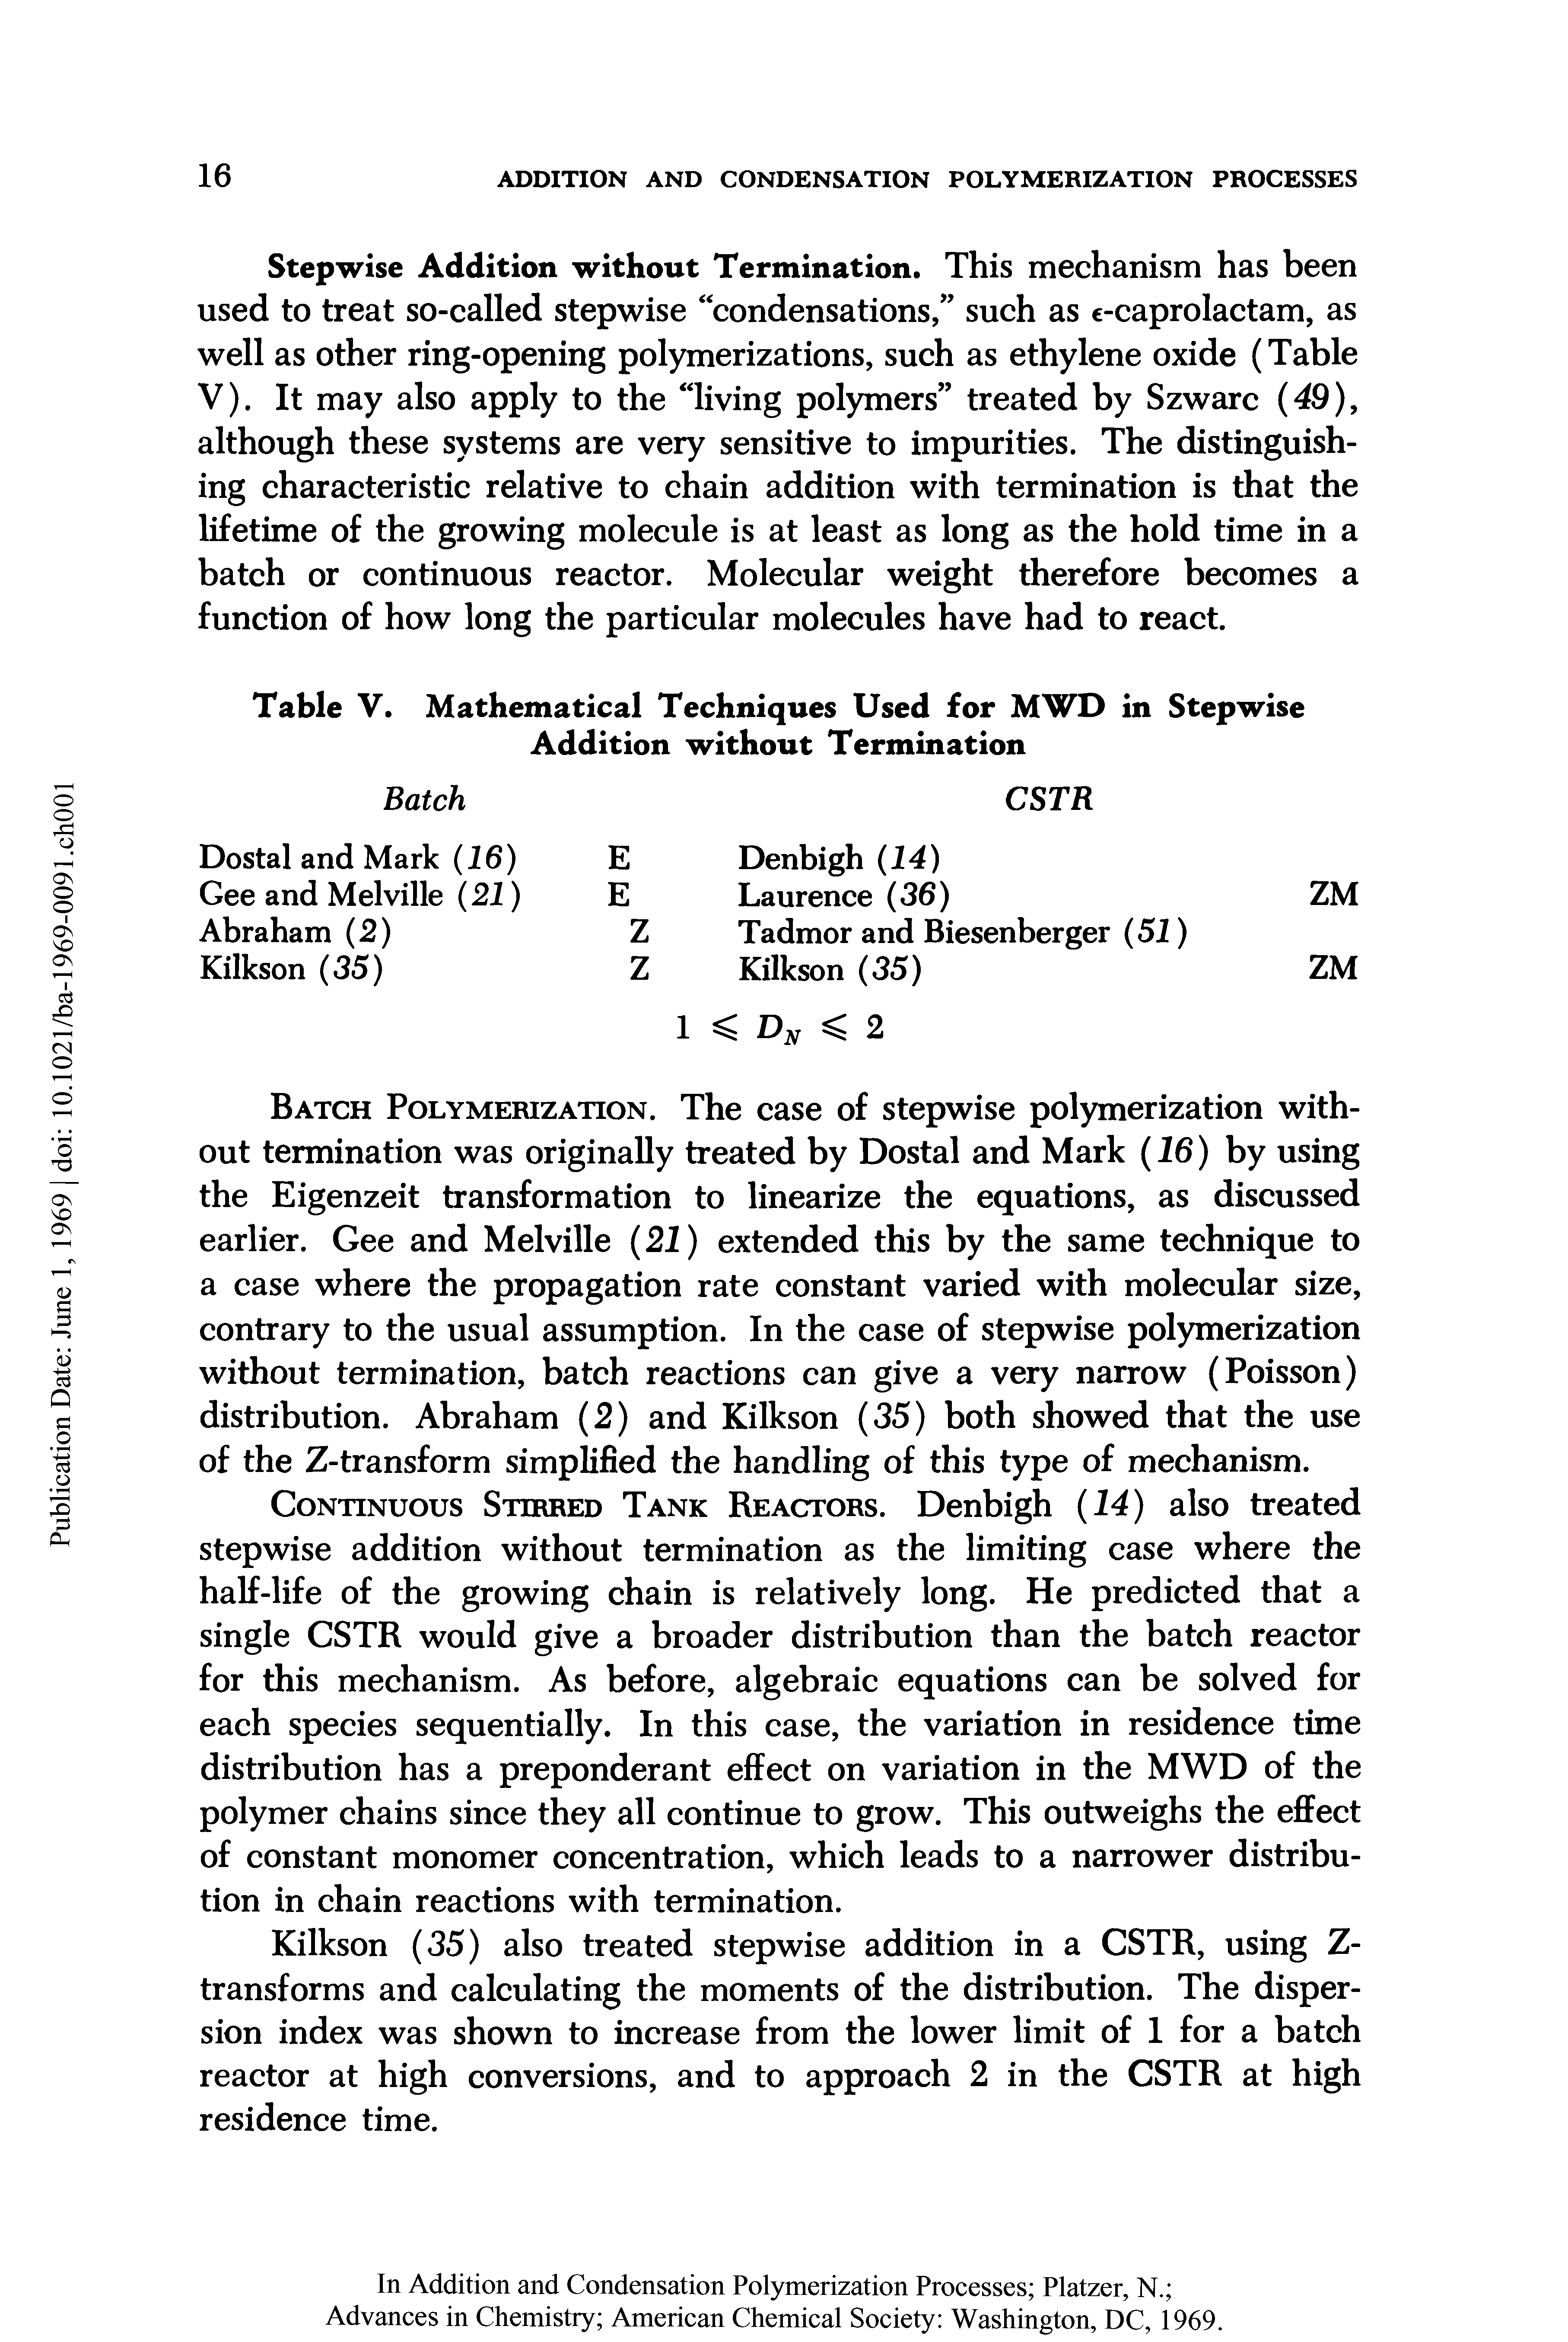 Table V. Mathematical Techniques Used for MWD in Stepwise Addition without Termination...